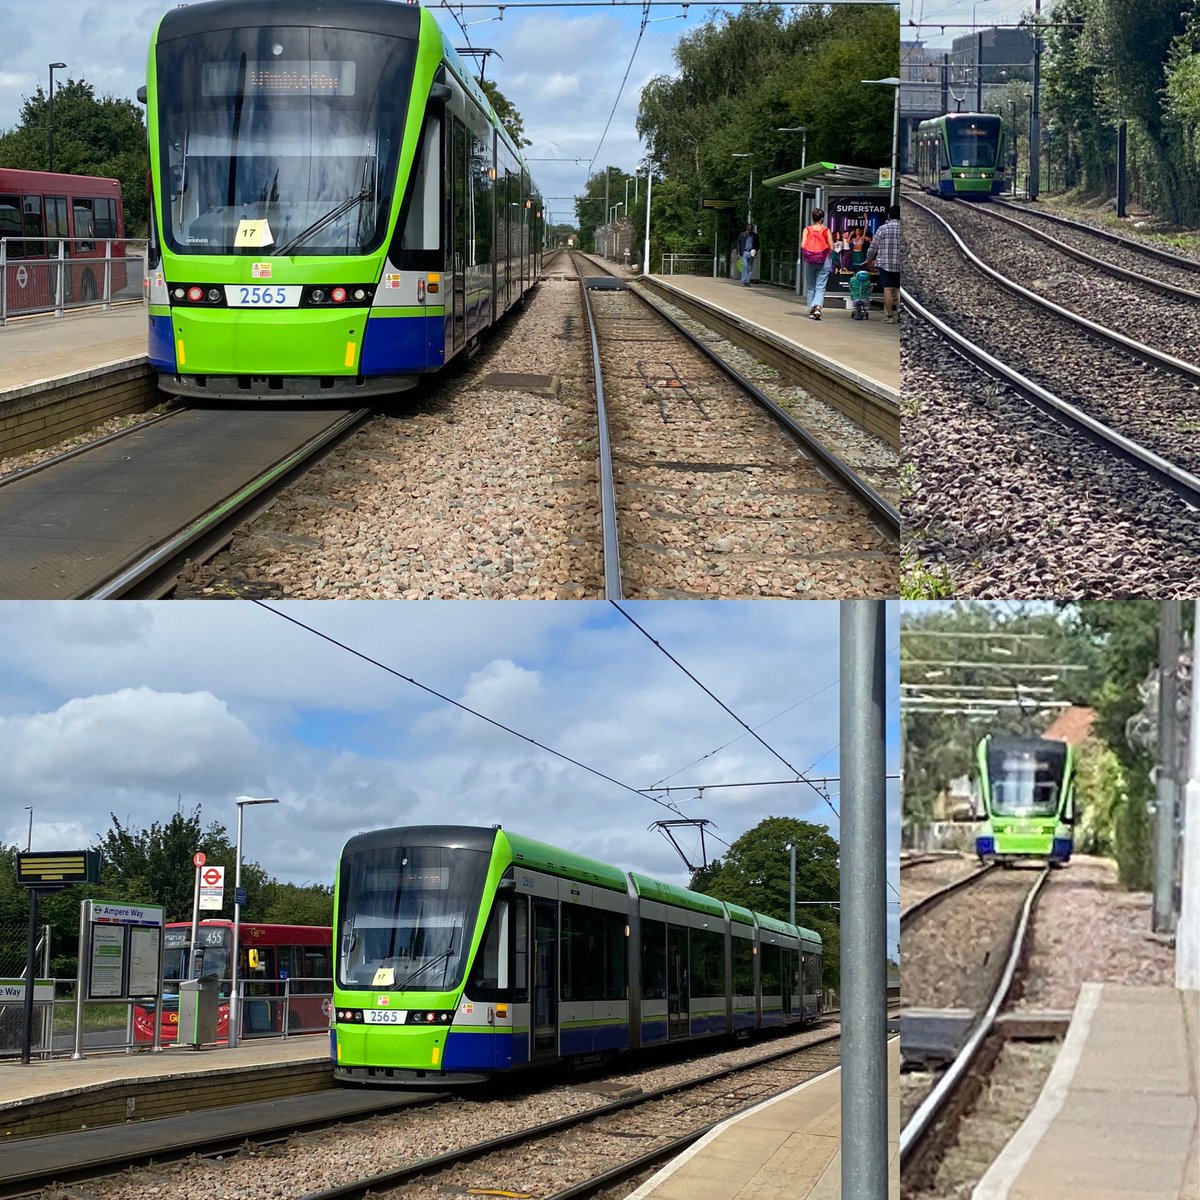 Day in #Croydon and I saw this and yes I got excited over a #tram wish there was the space for a tramline in #Southend I would use public transport more for sure 🧐